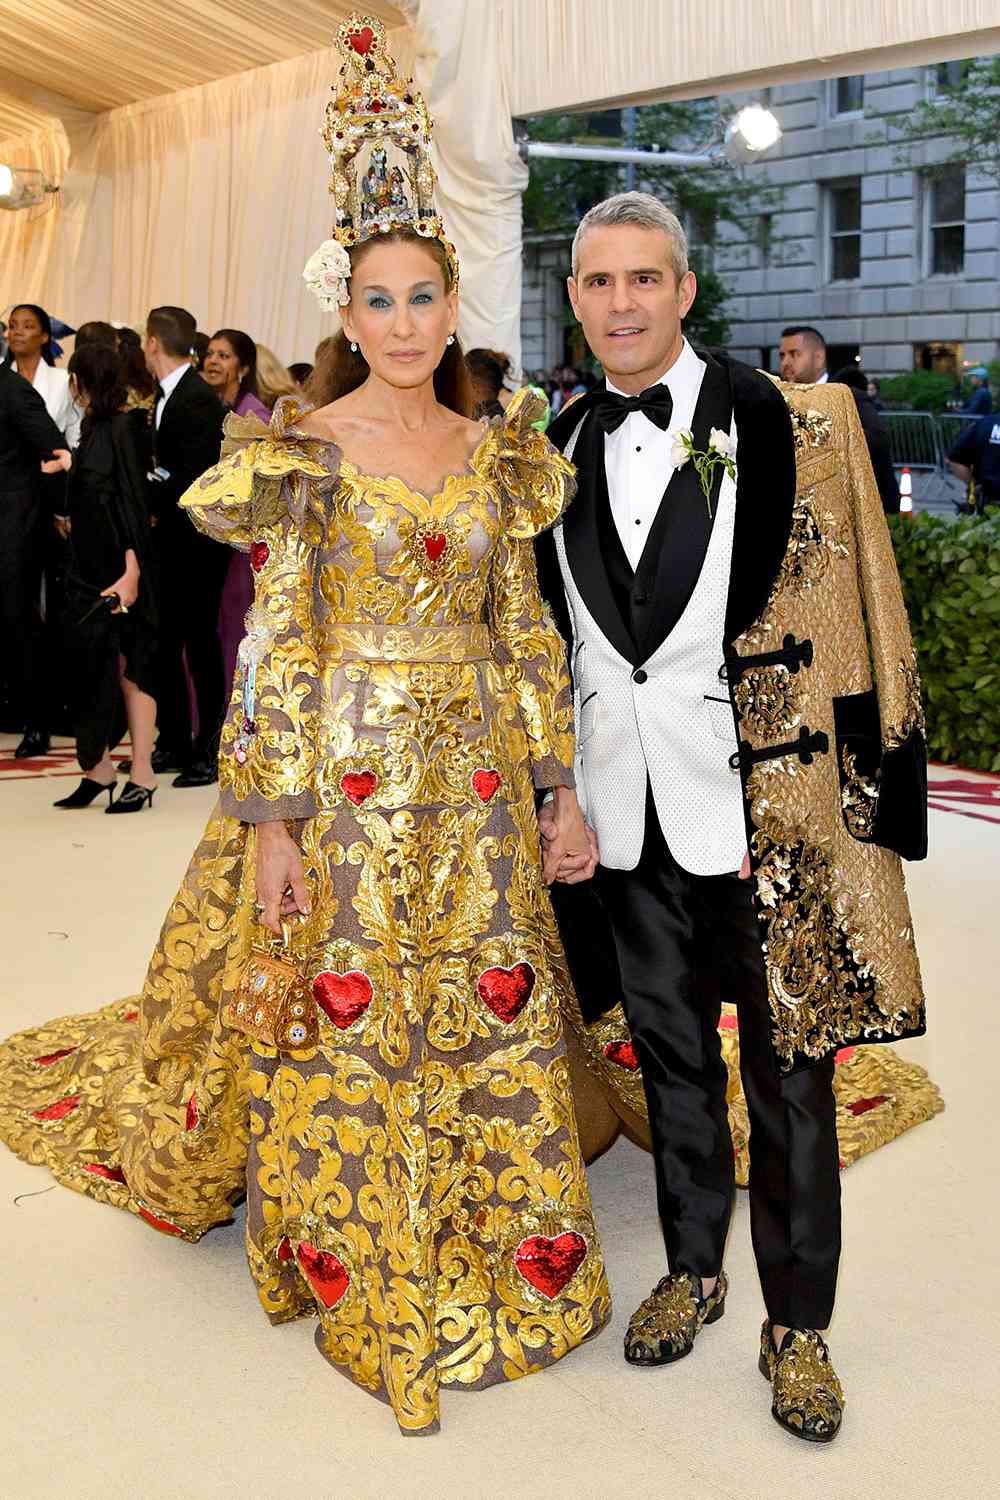 Sarah Jessica Parker and Andy Cohen